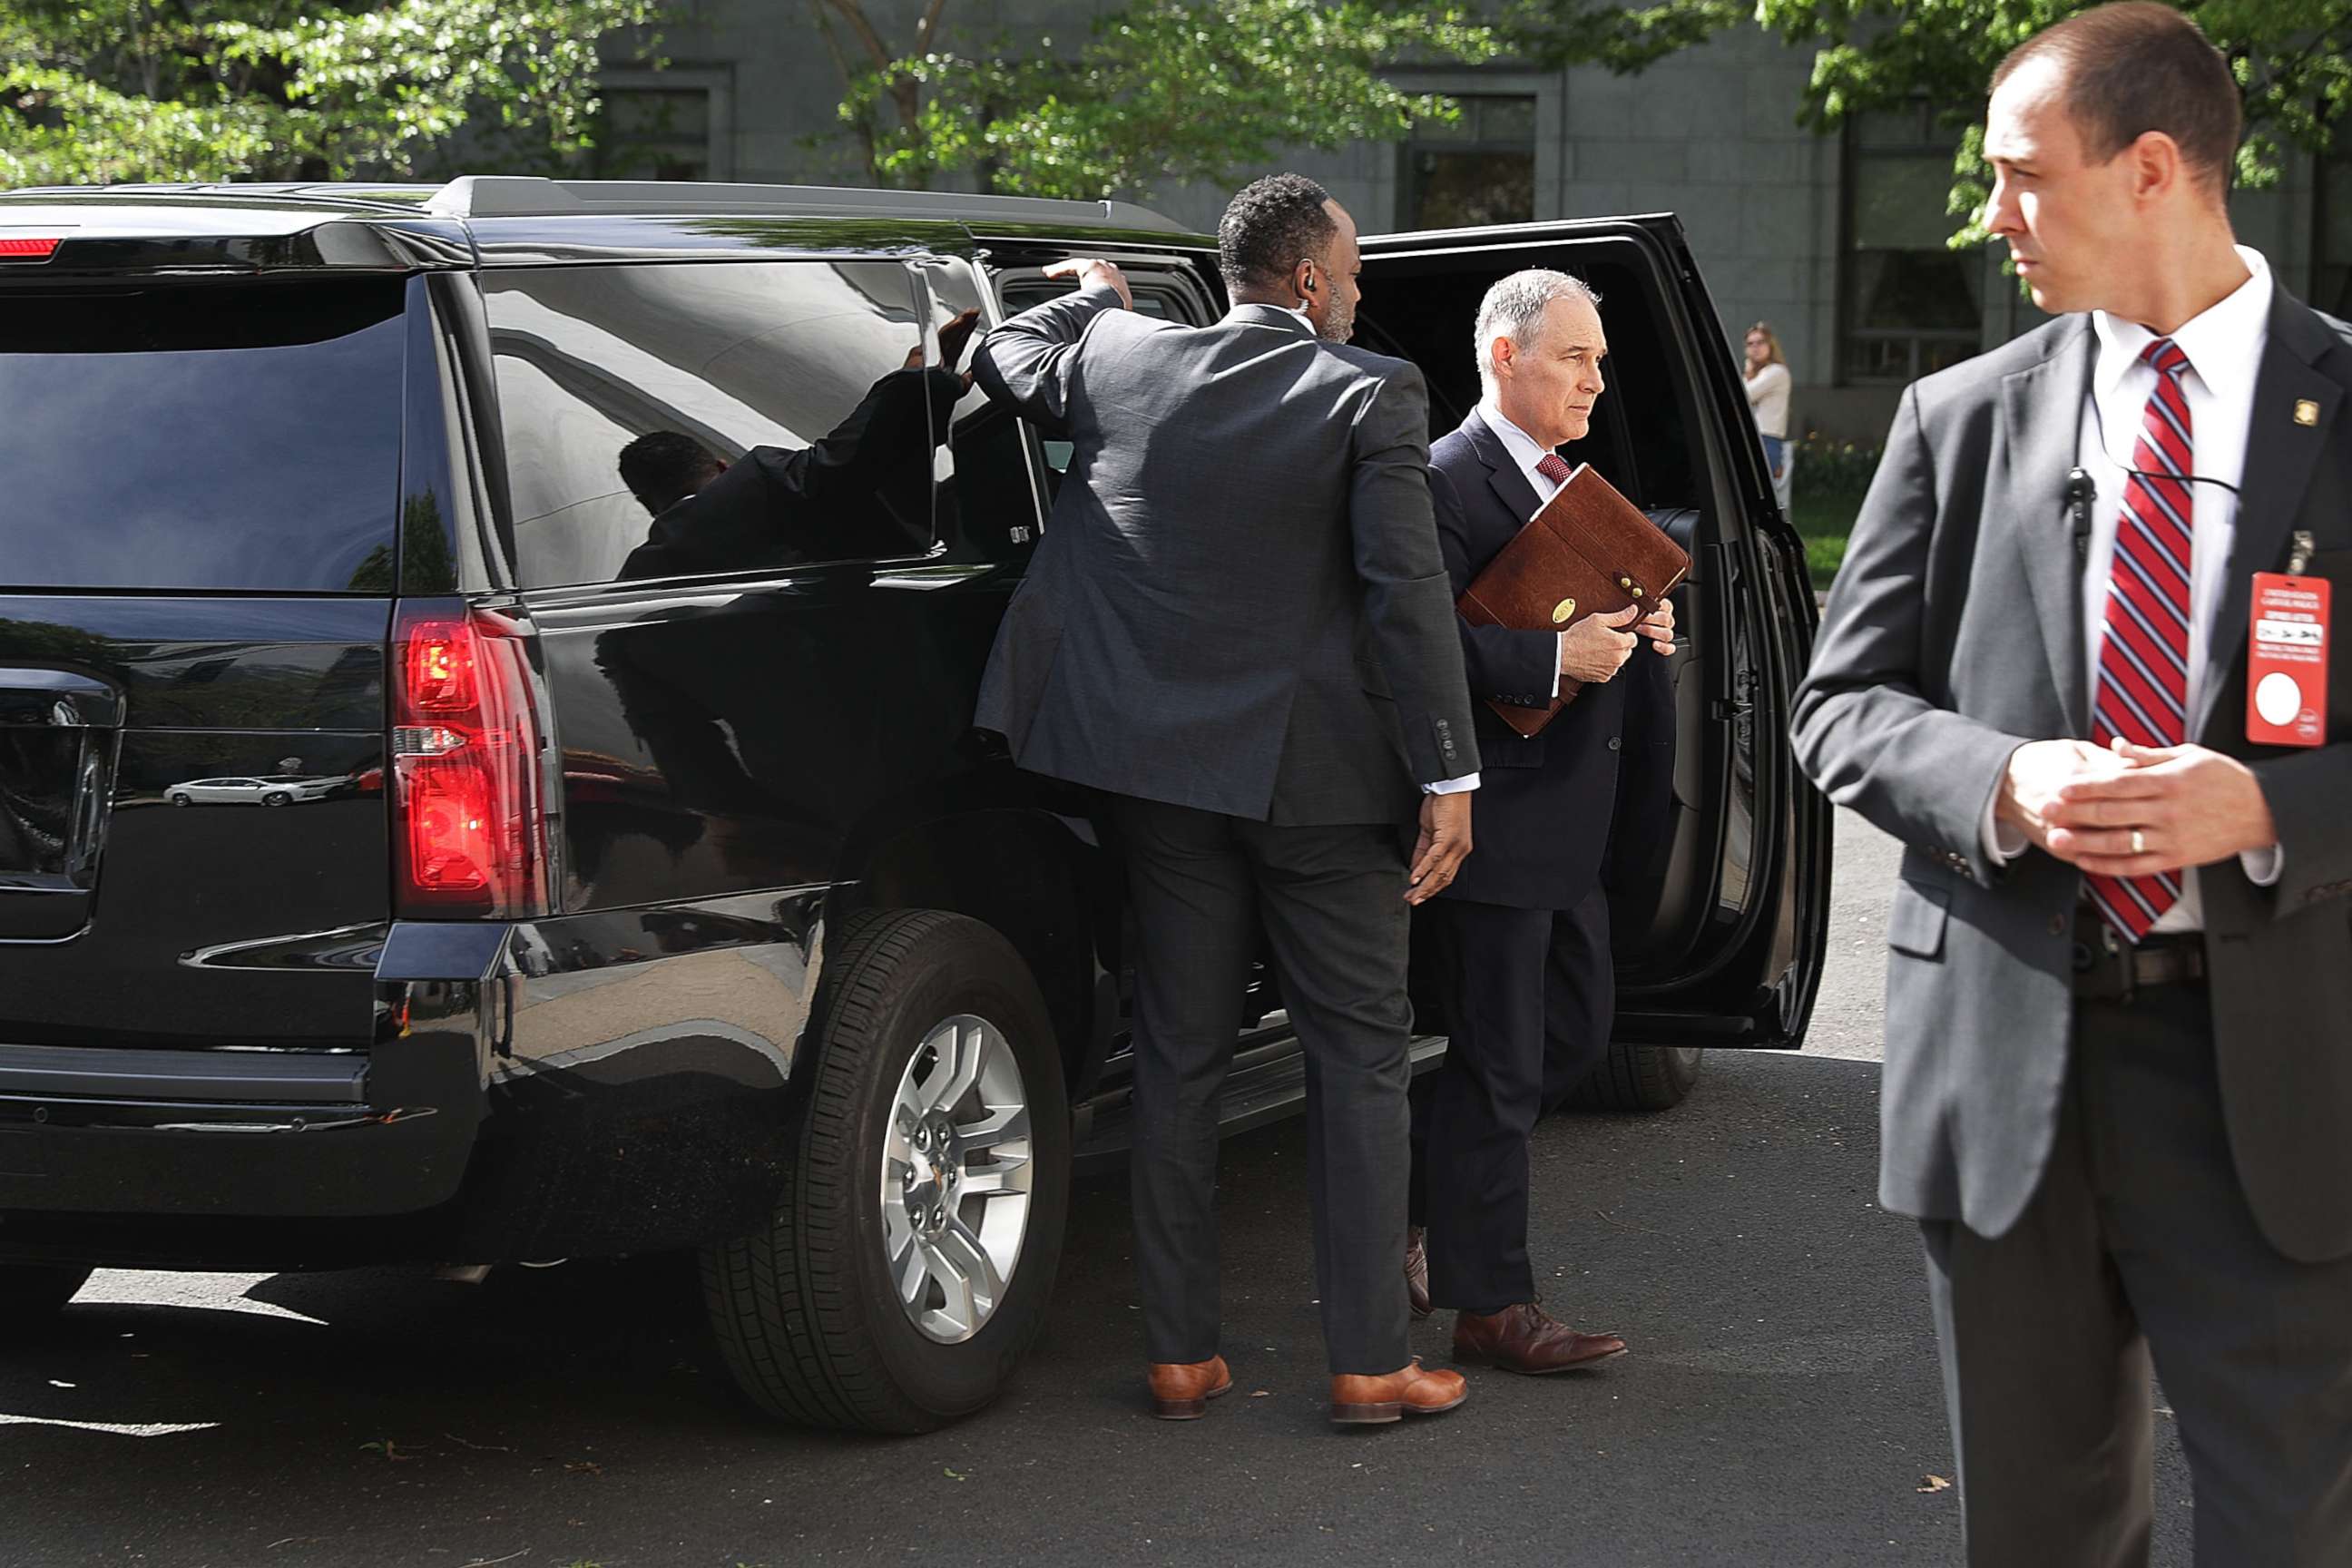 PHOTO: Surrounded by security agents, EPA Administrator Scott Pruitt steps out of his armored SUV as he arrives to testify before the House Energy and Commerce Committee's Environment Subcommittee on Capitol Hill April 26, 2018 in Washington.